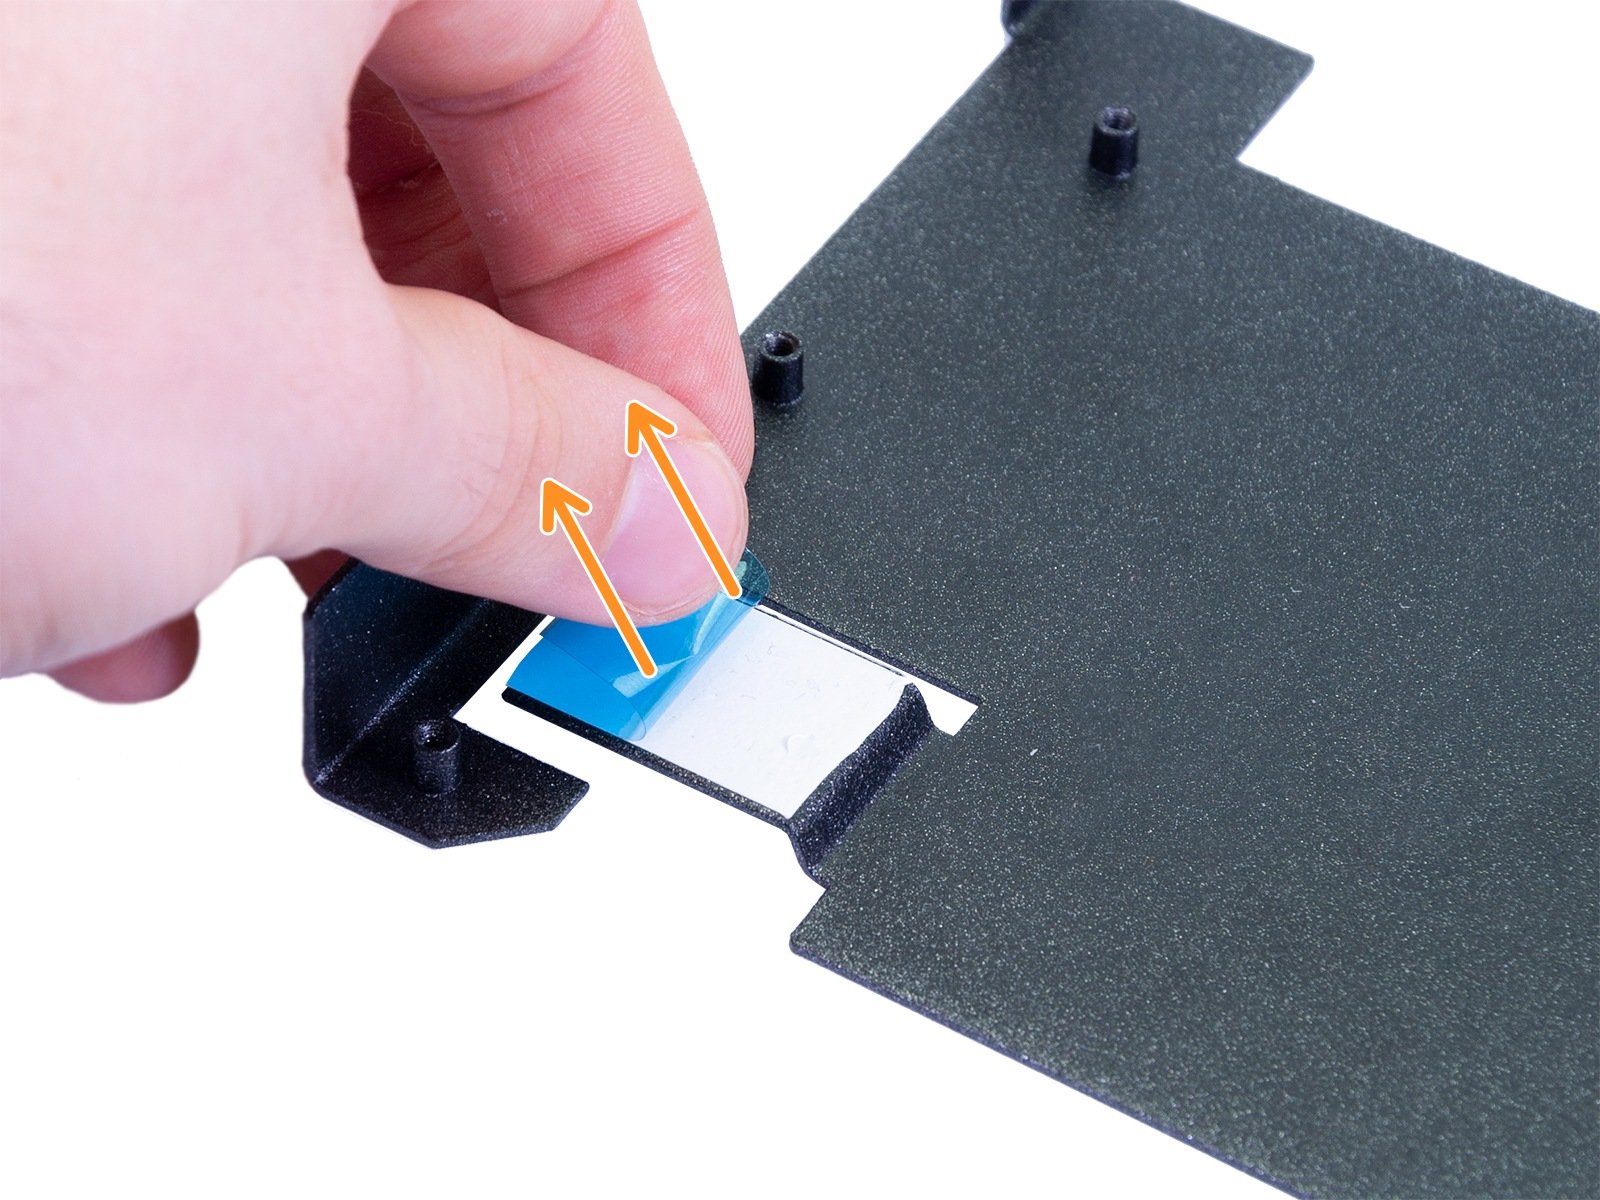 Glueing the thermal pad